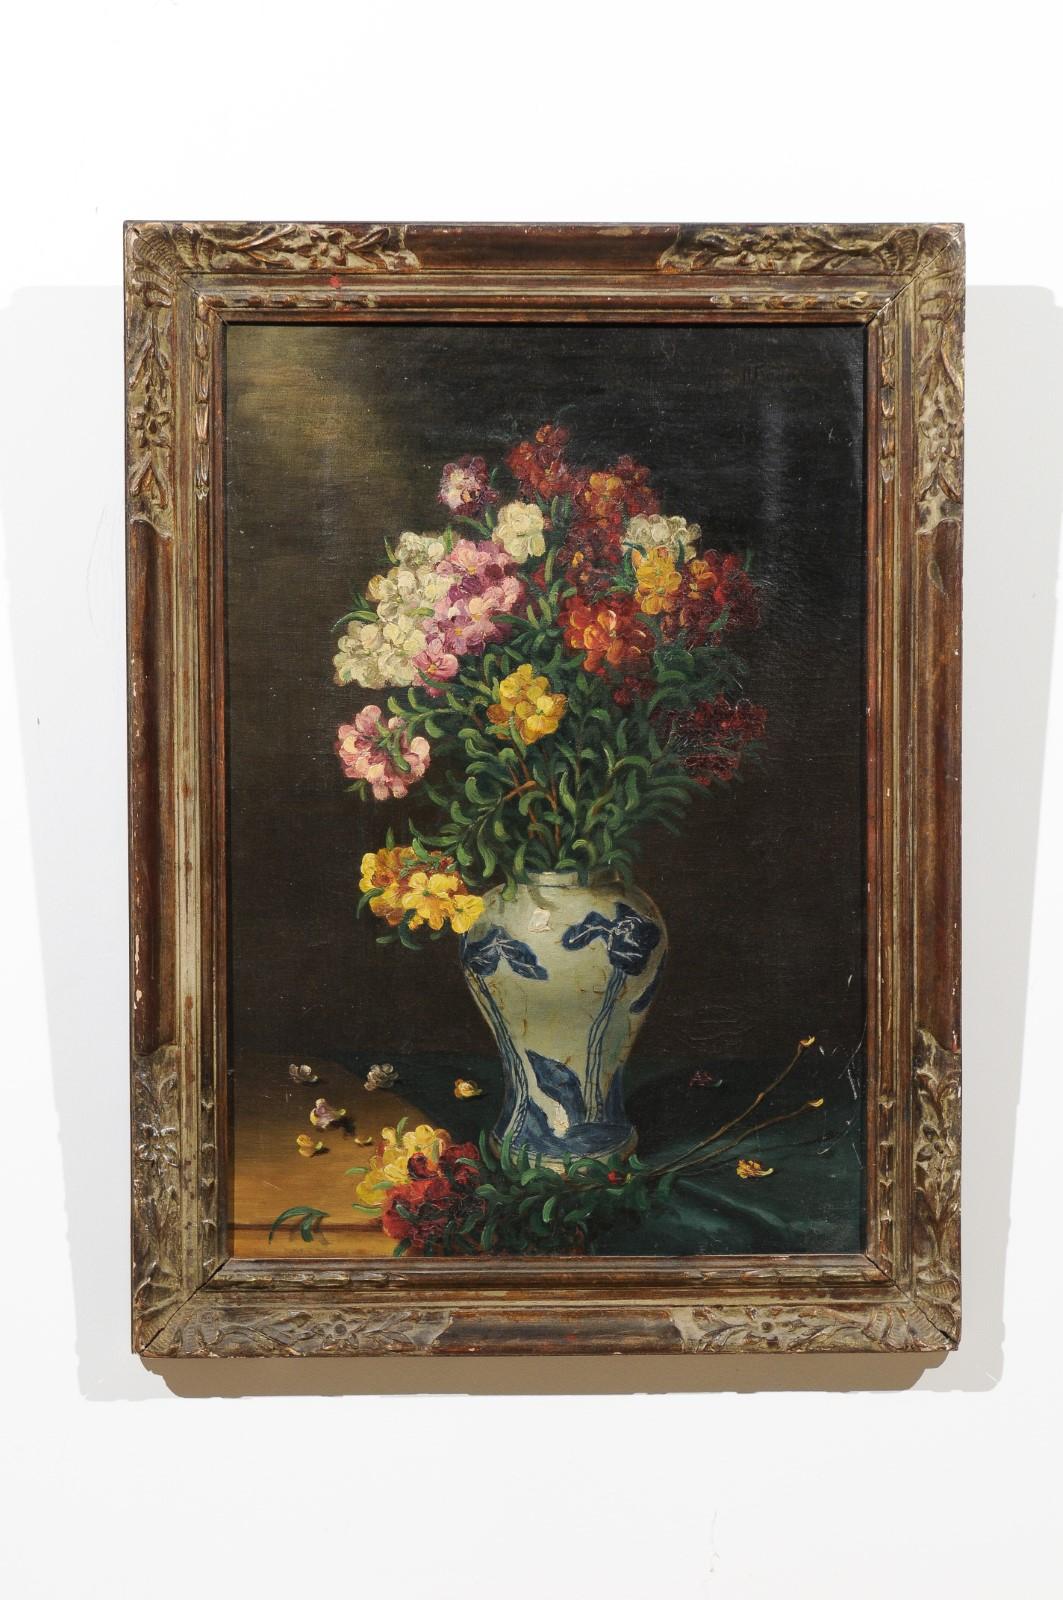 An English framed still-life painting from the 19th century depicting a bouquet of flowers in blue and white porcelain and signed Henry Roberts. Born in England during the 19th century, this elegant still-life painting depicts a colorful bouquet of